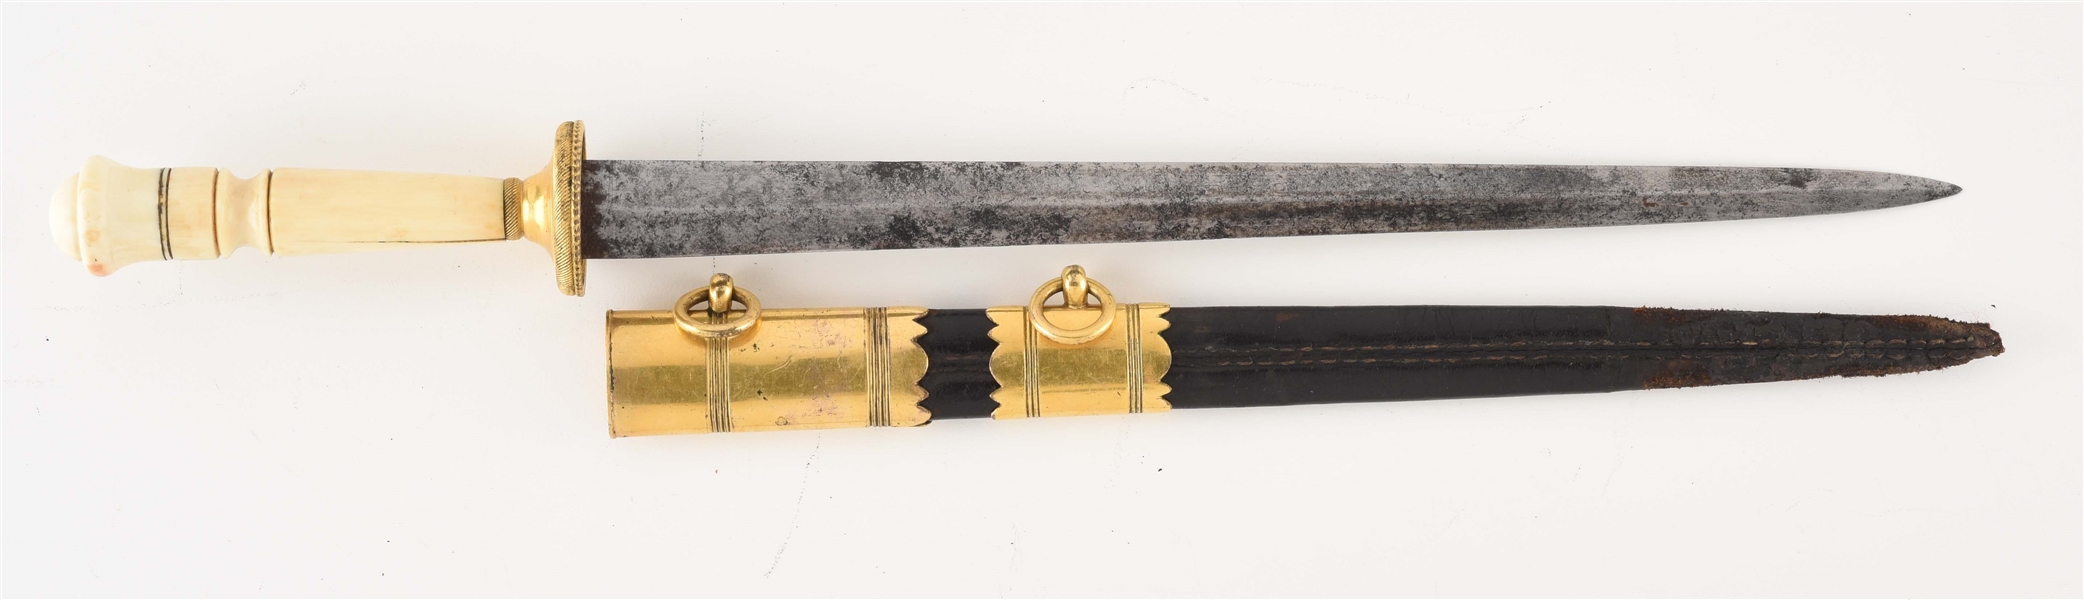 FINE ENGLISH NAVAL DIRK BY SALTER CUTLERS OF LONDON.